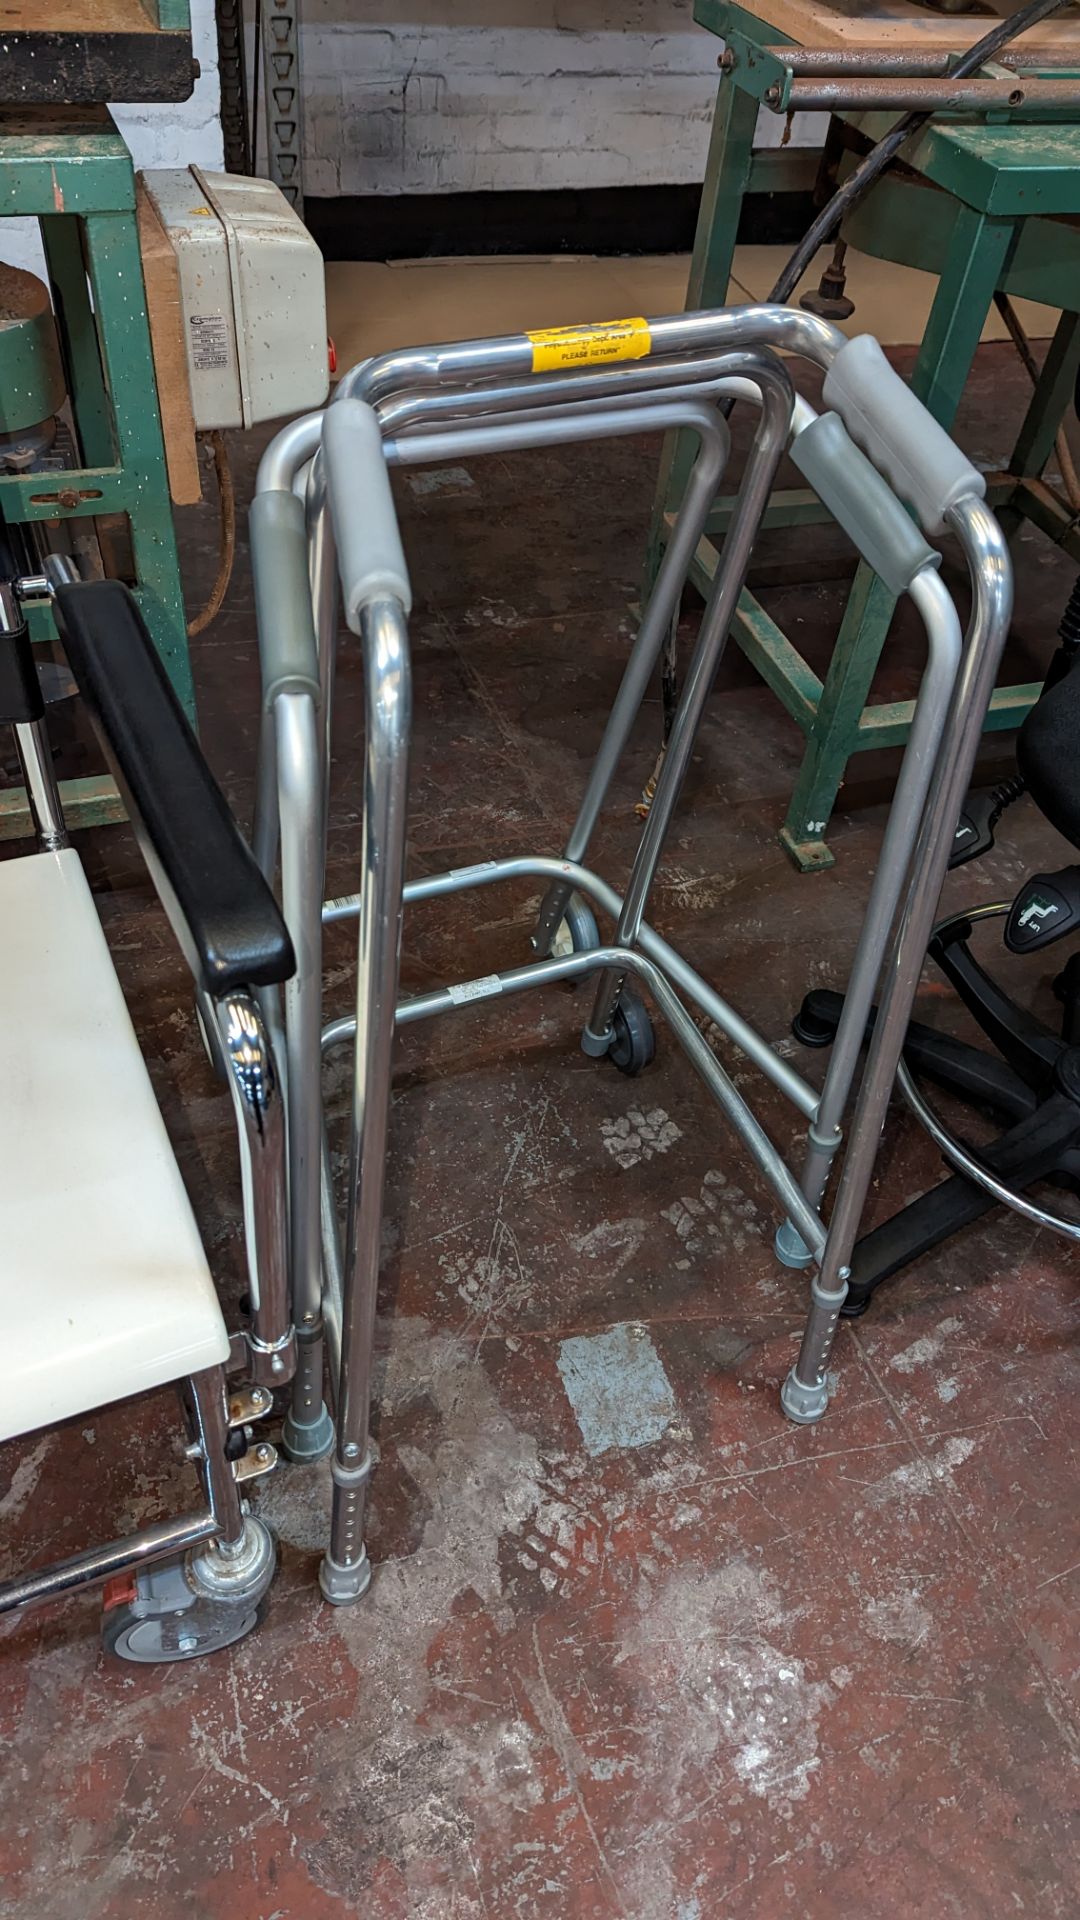 Mobile commode chair plus 2 mobile walking frames - Image 5 of 6